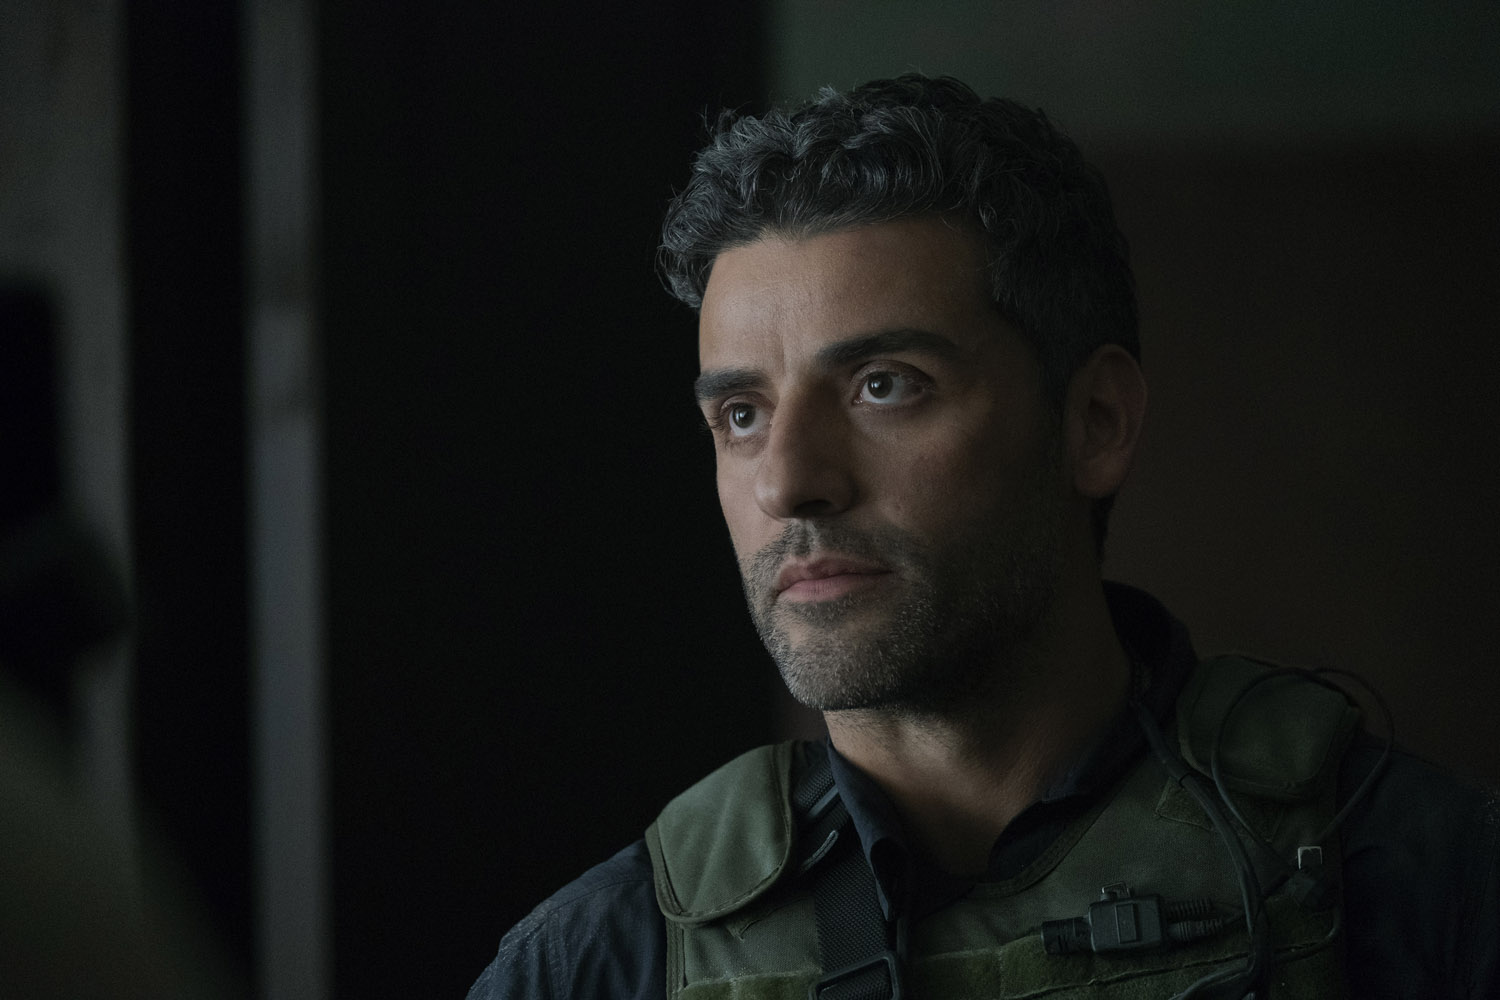 Oscar Isaac Set to Star as Poker Player in Paul Schrader Movie ‘The Card Counter’